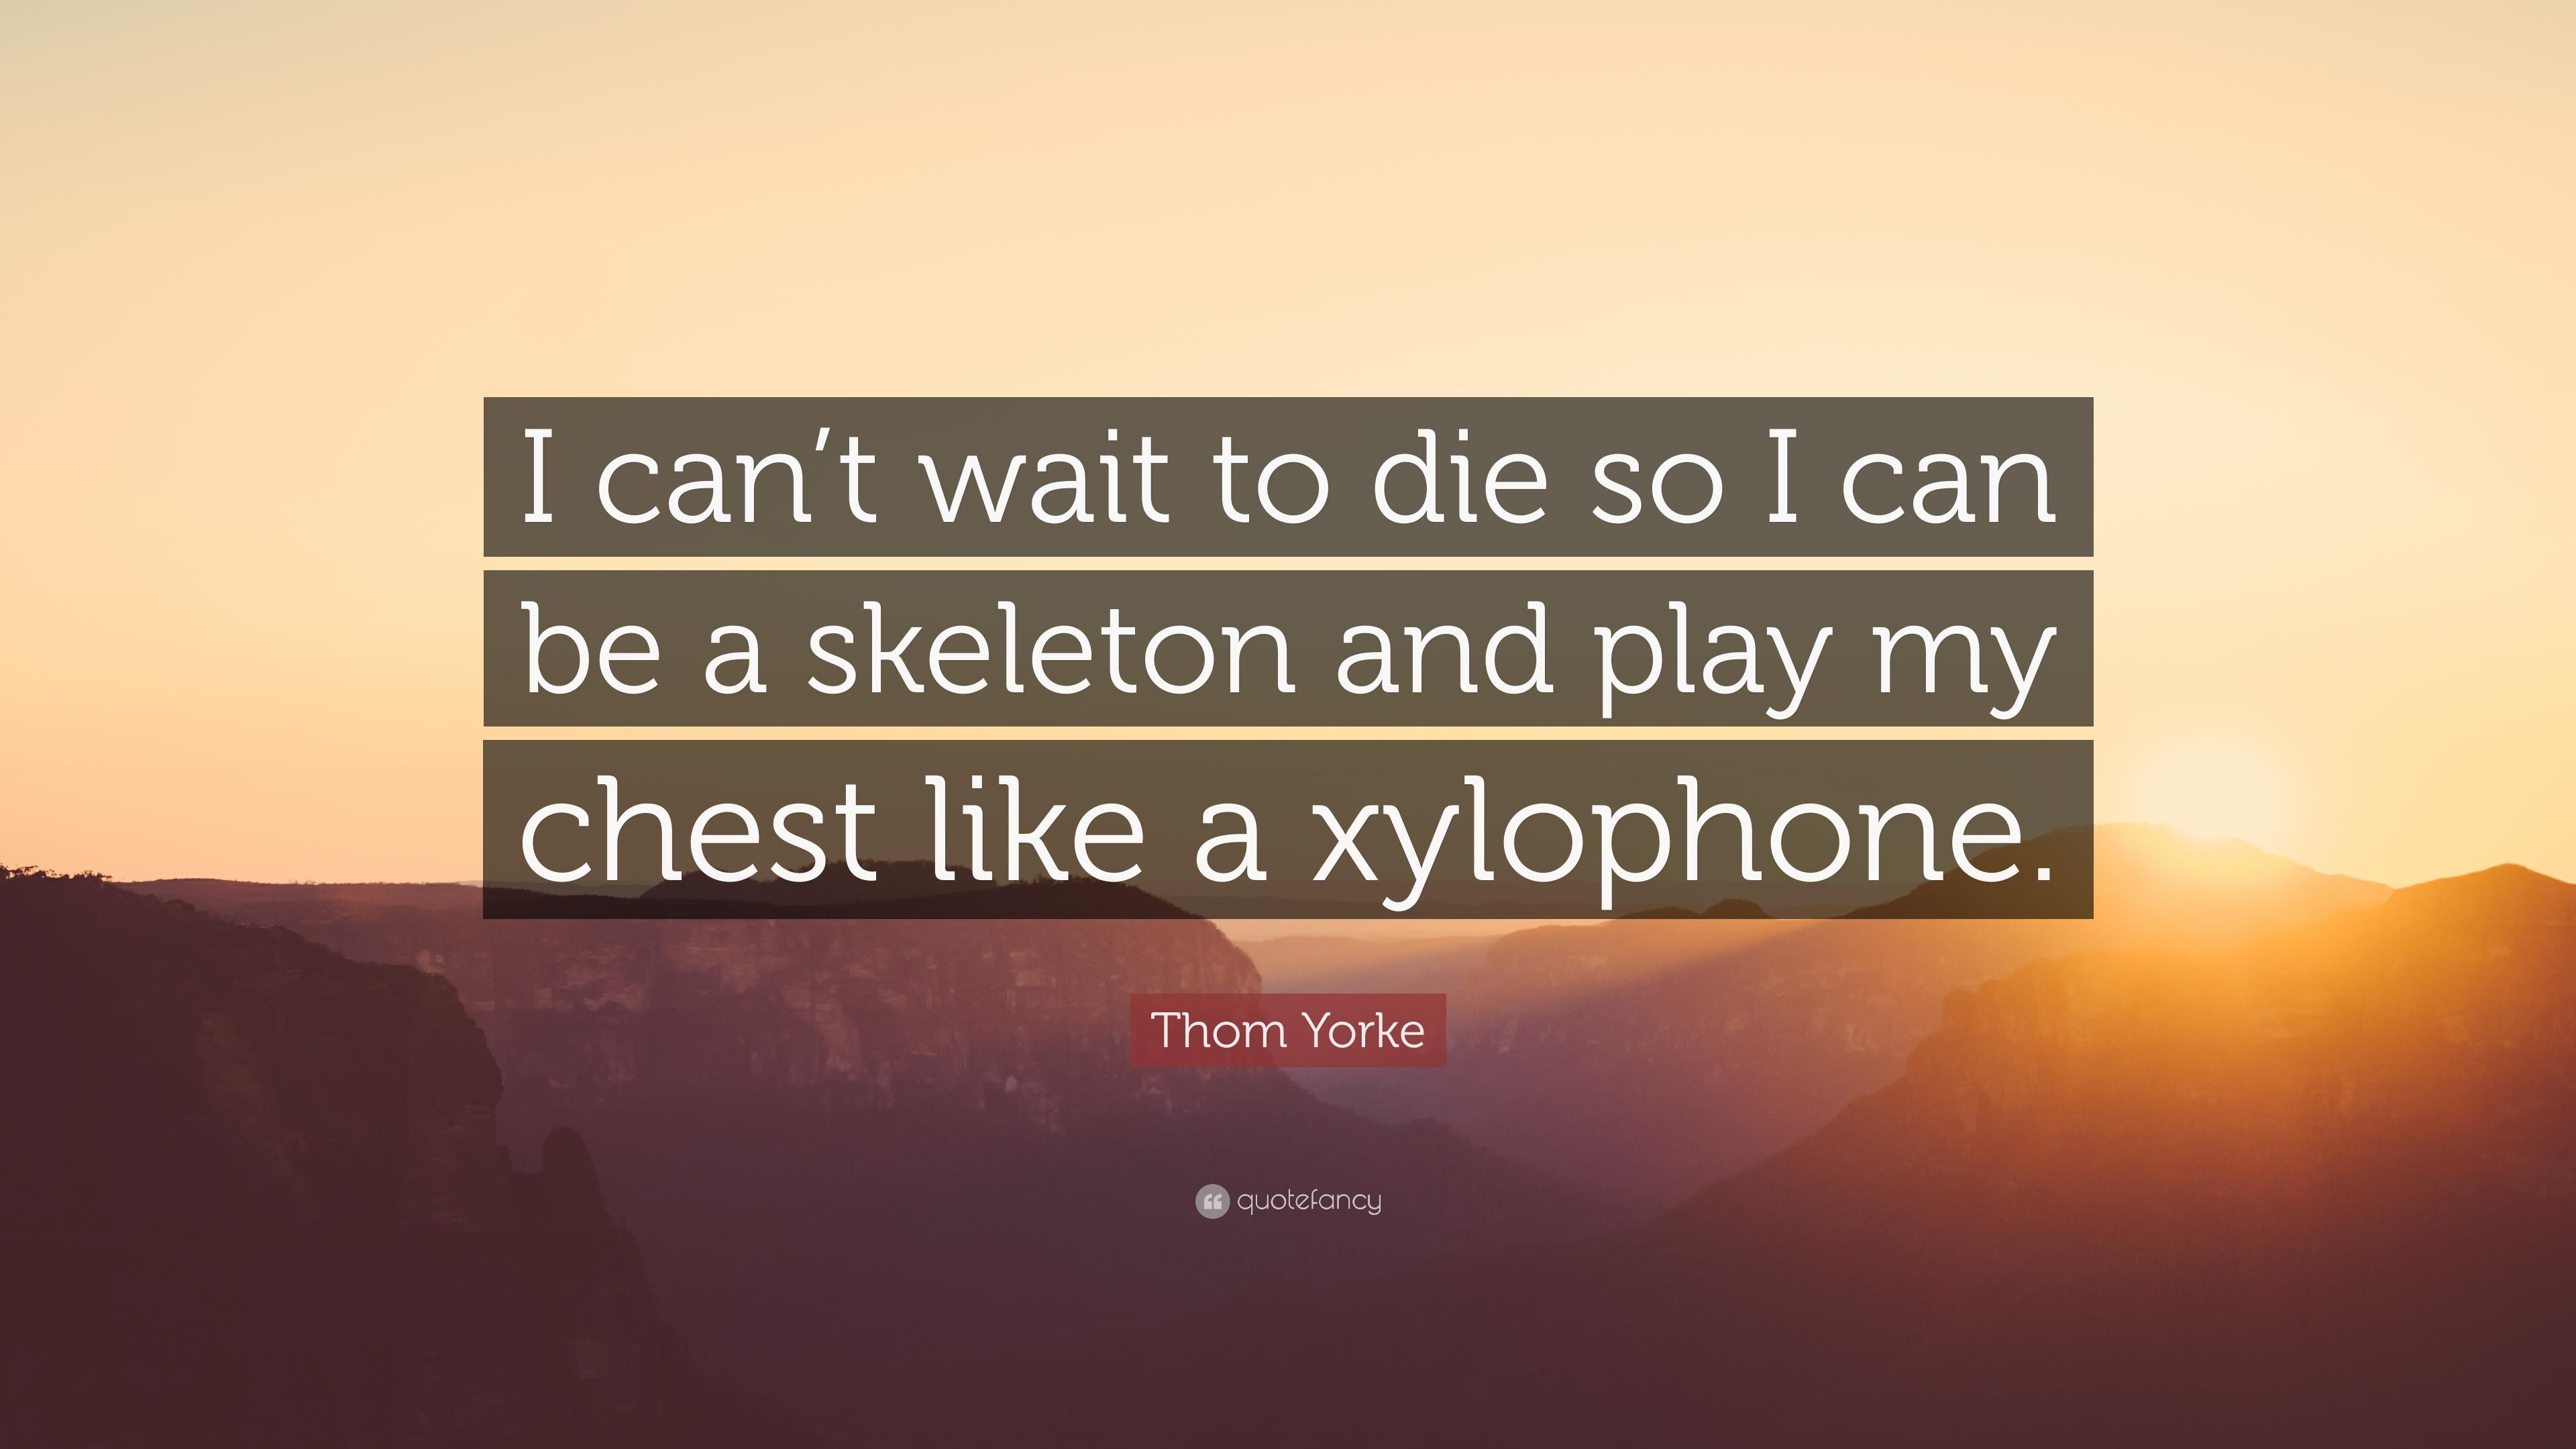 Thom Yorke Quote: “I can't wait to die so I can be a skeleton